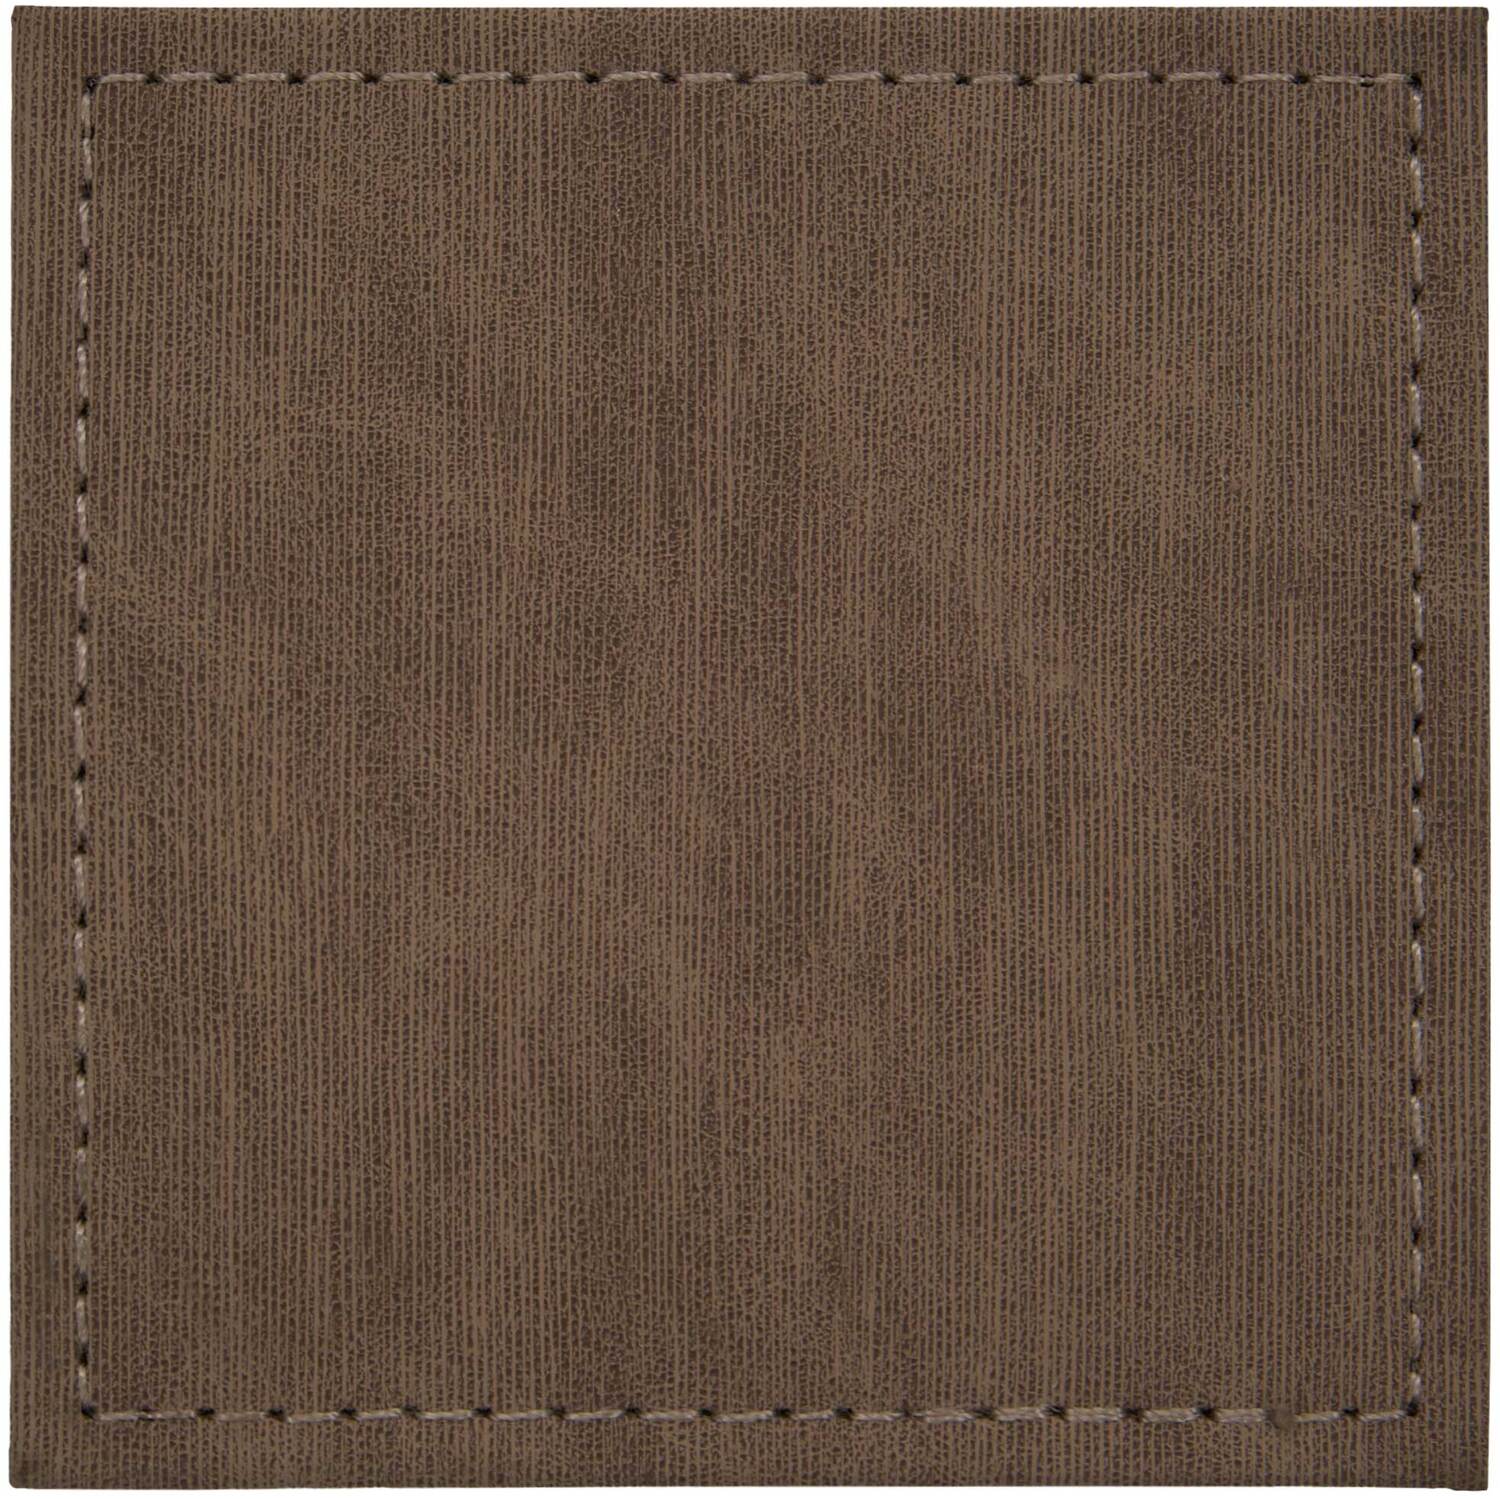 Set of 4 Faux Leather Coasters - Brown Image 3